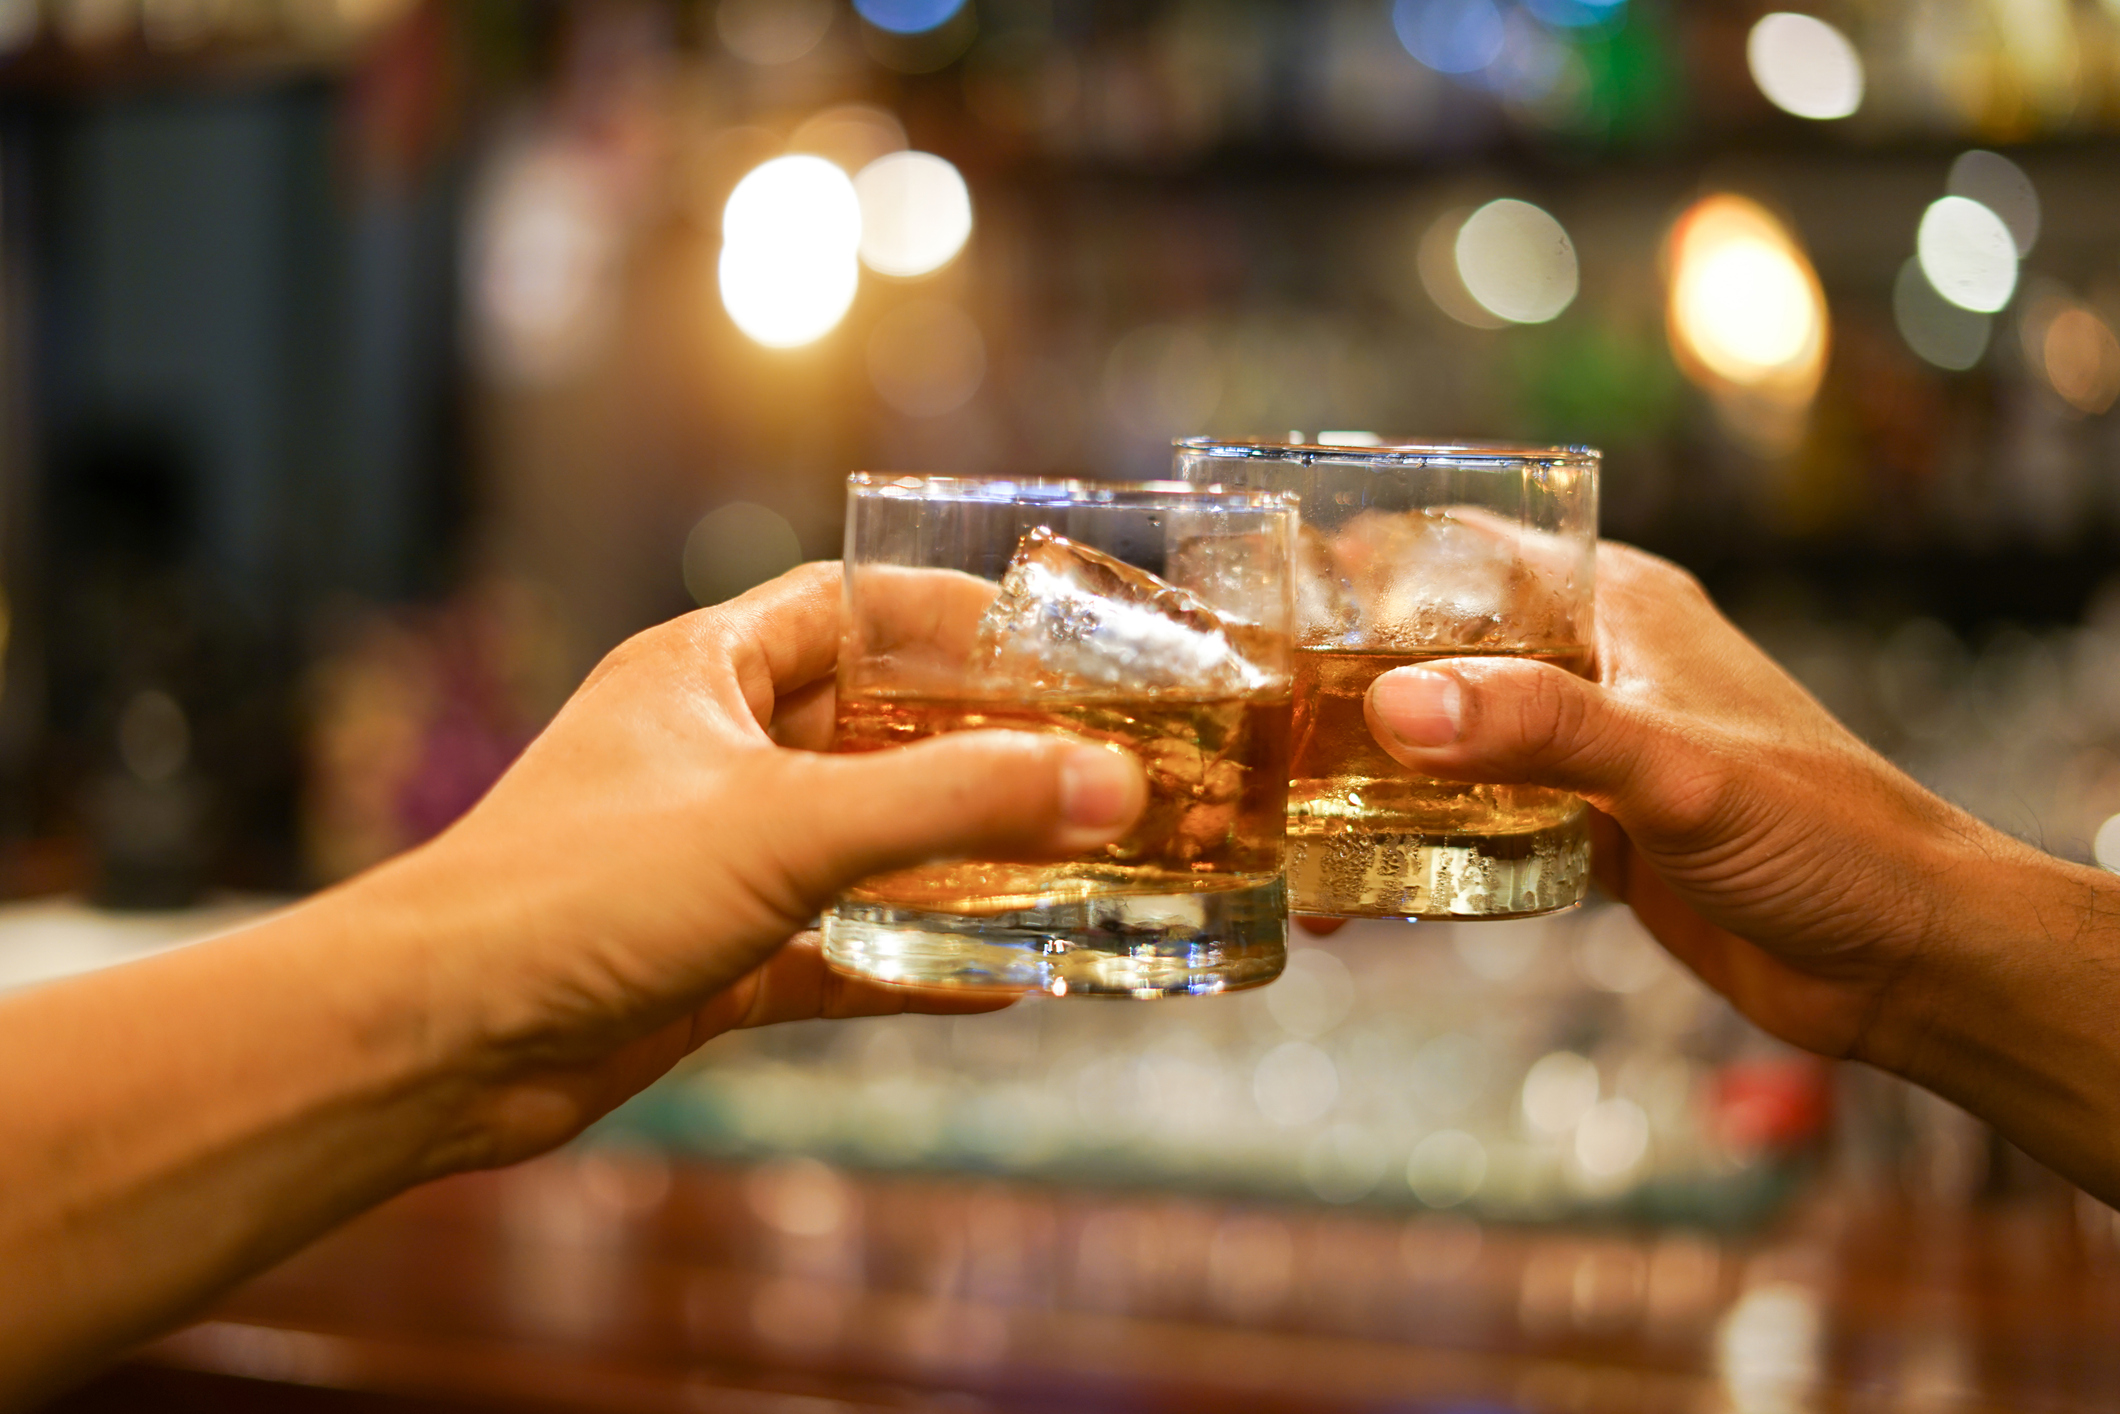 Two men clinking glasses of whiskey drink alcohol beverage together at counter in the pub (Photo: iStock - krisanapong detraphiphat)